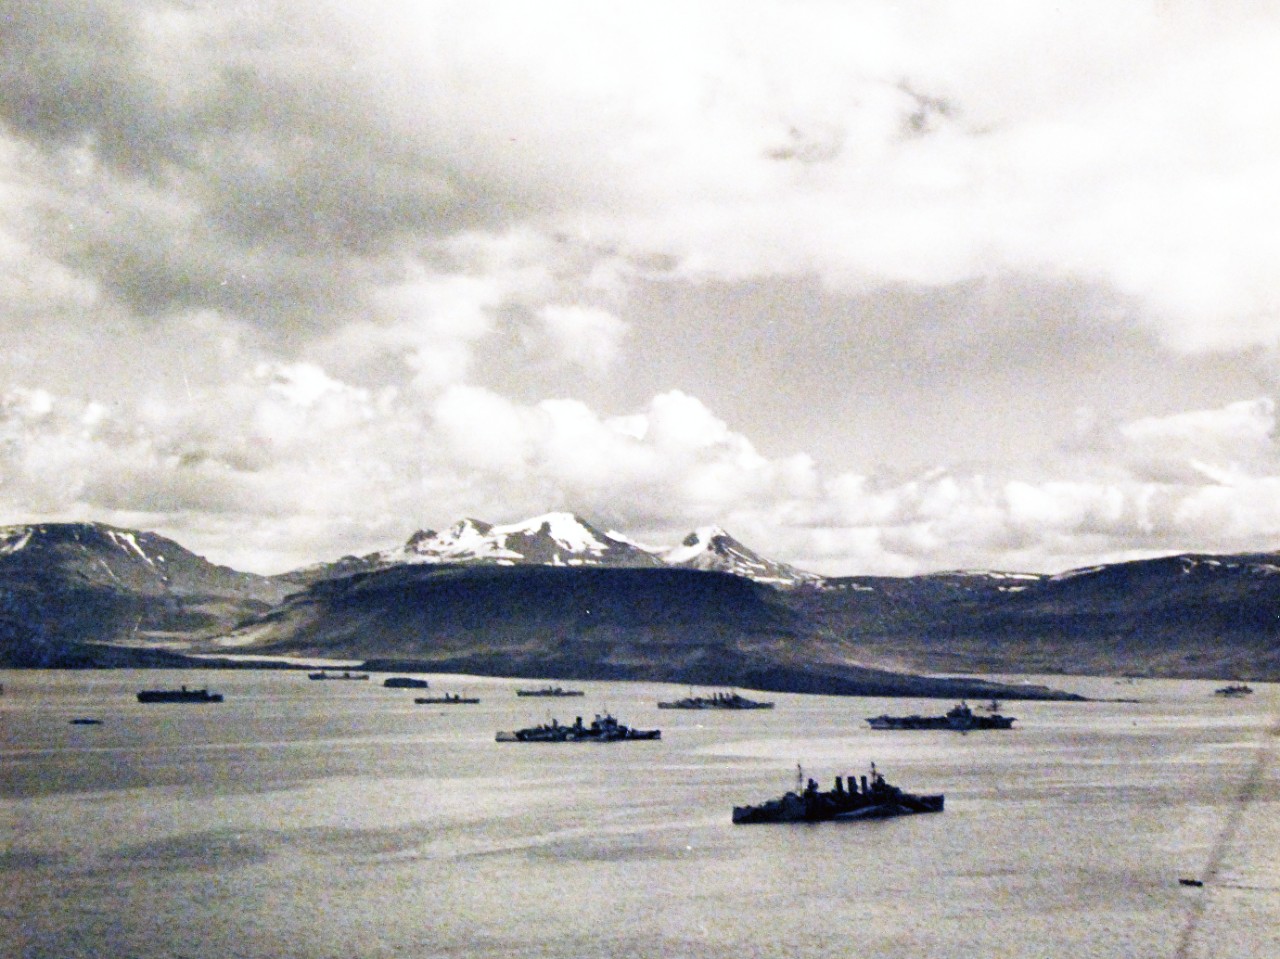 <p>80-G-24827: PQ-17 Arctic Convoy, June-July 1942. he covering forces of the PQ-17 Convoy (British and American ships) at anchor in the harbor at Hvalfjord, Iceland.&nbsp;</p>
